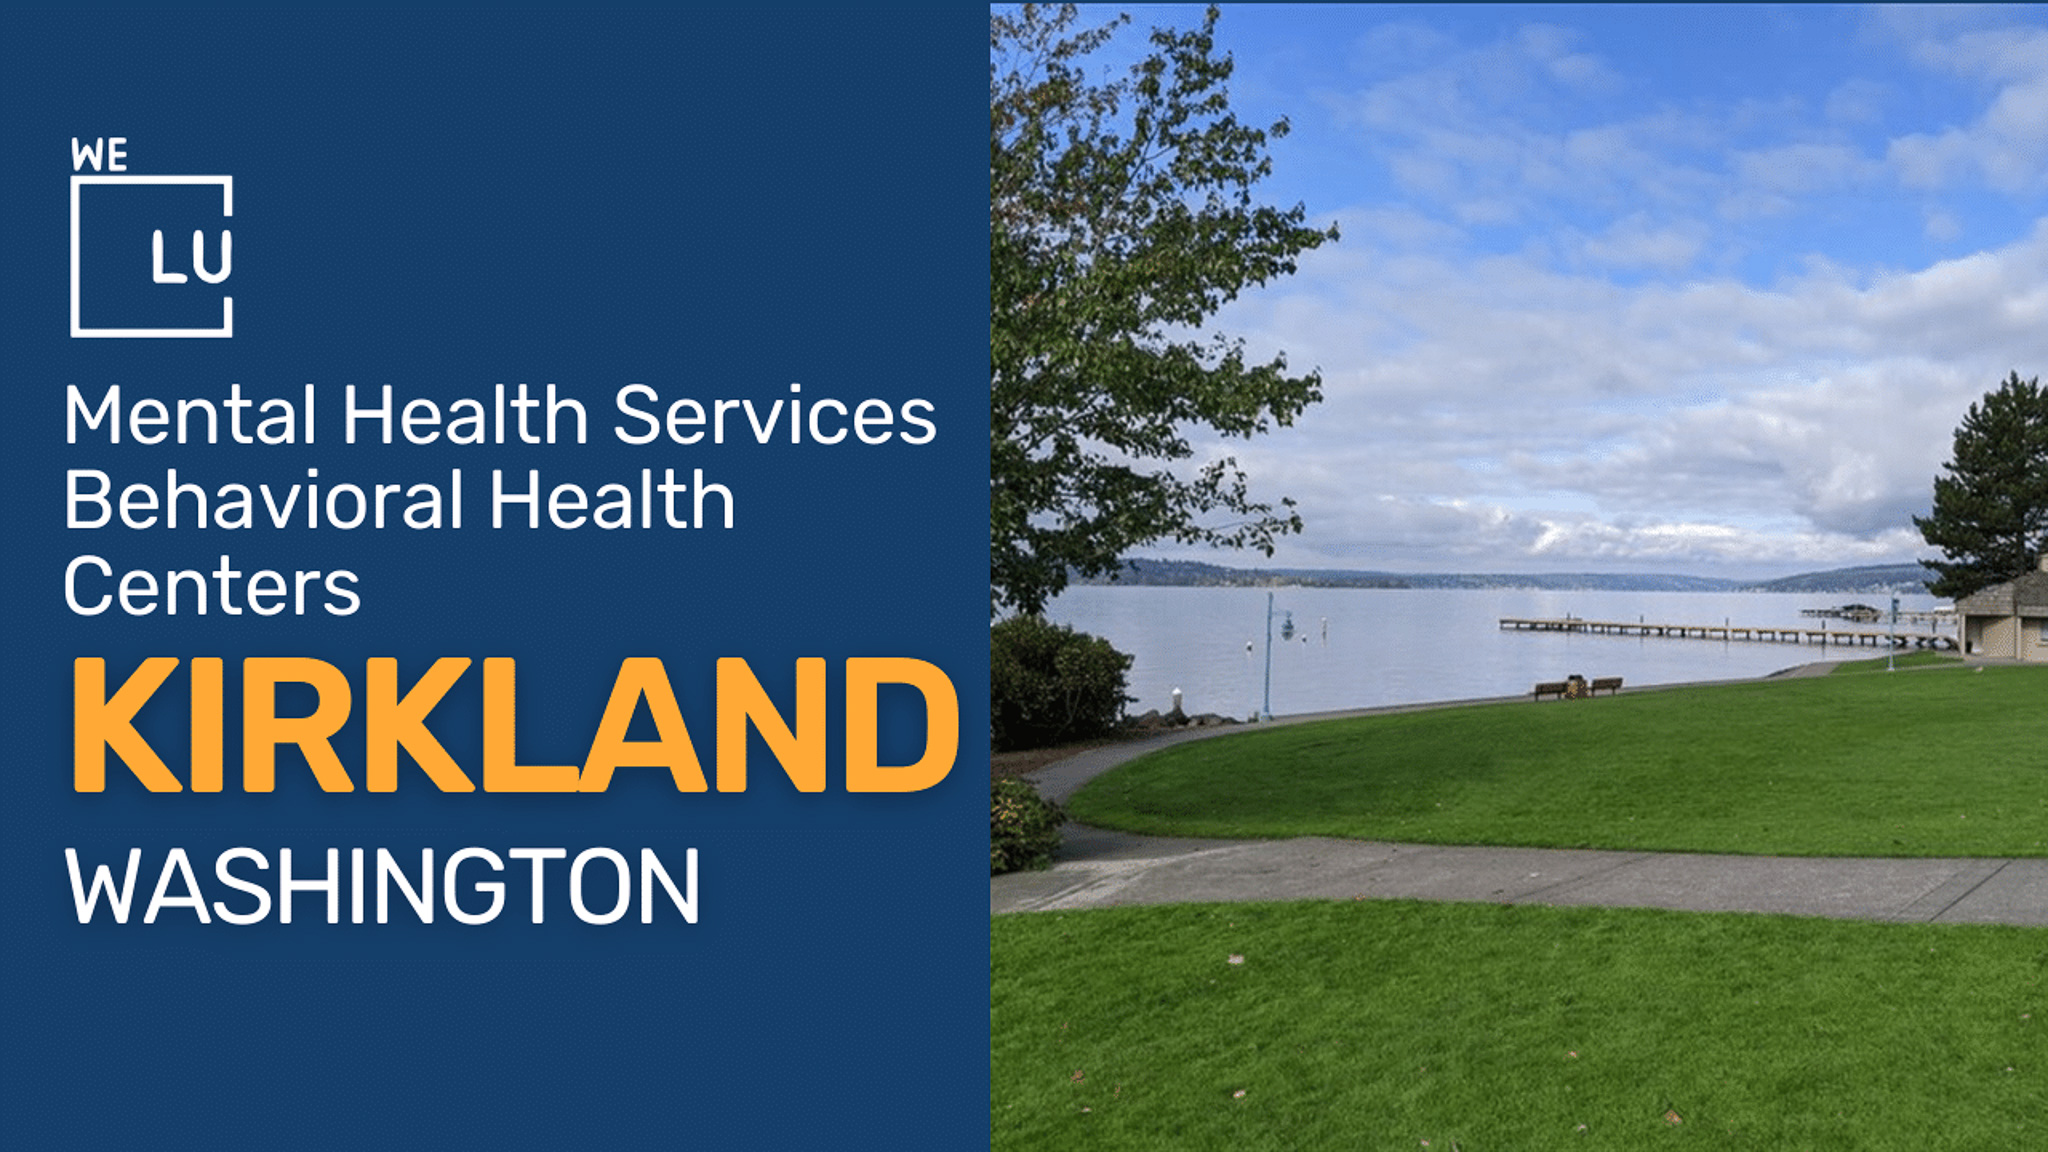 Kirkland WA We Level Up treatment center for drug and alcohol rehab detox and mental health services - Image 1